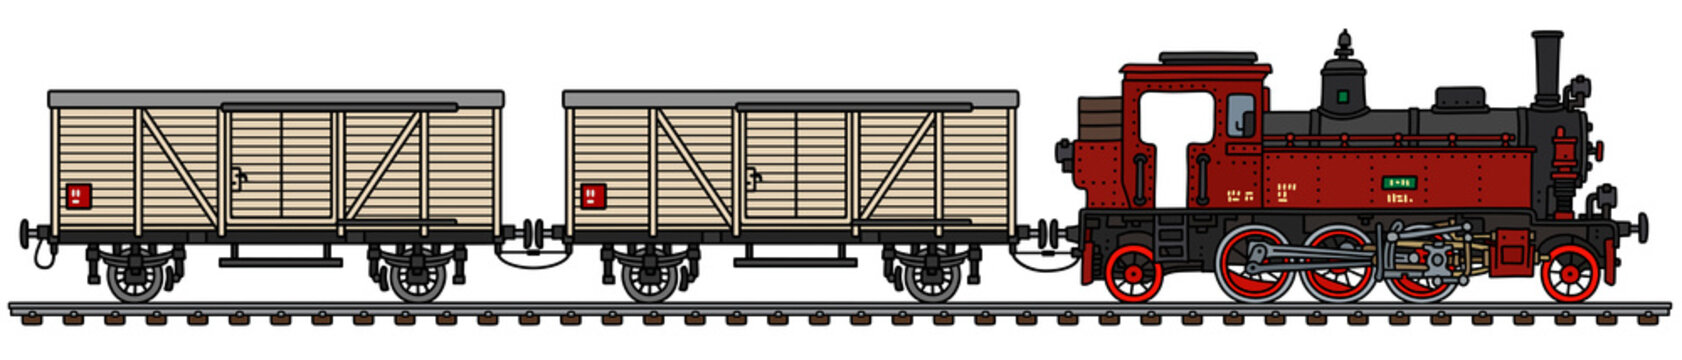 The vectorized hand drawing of a vintage freight steam train